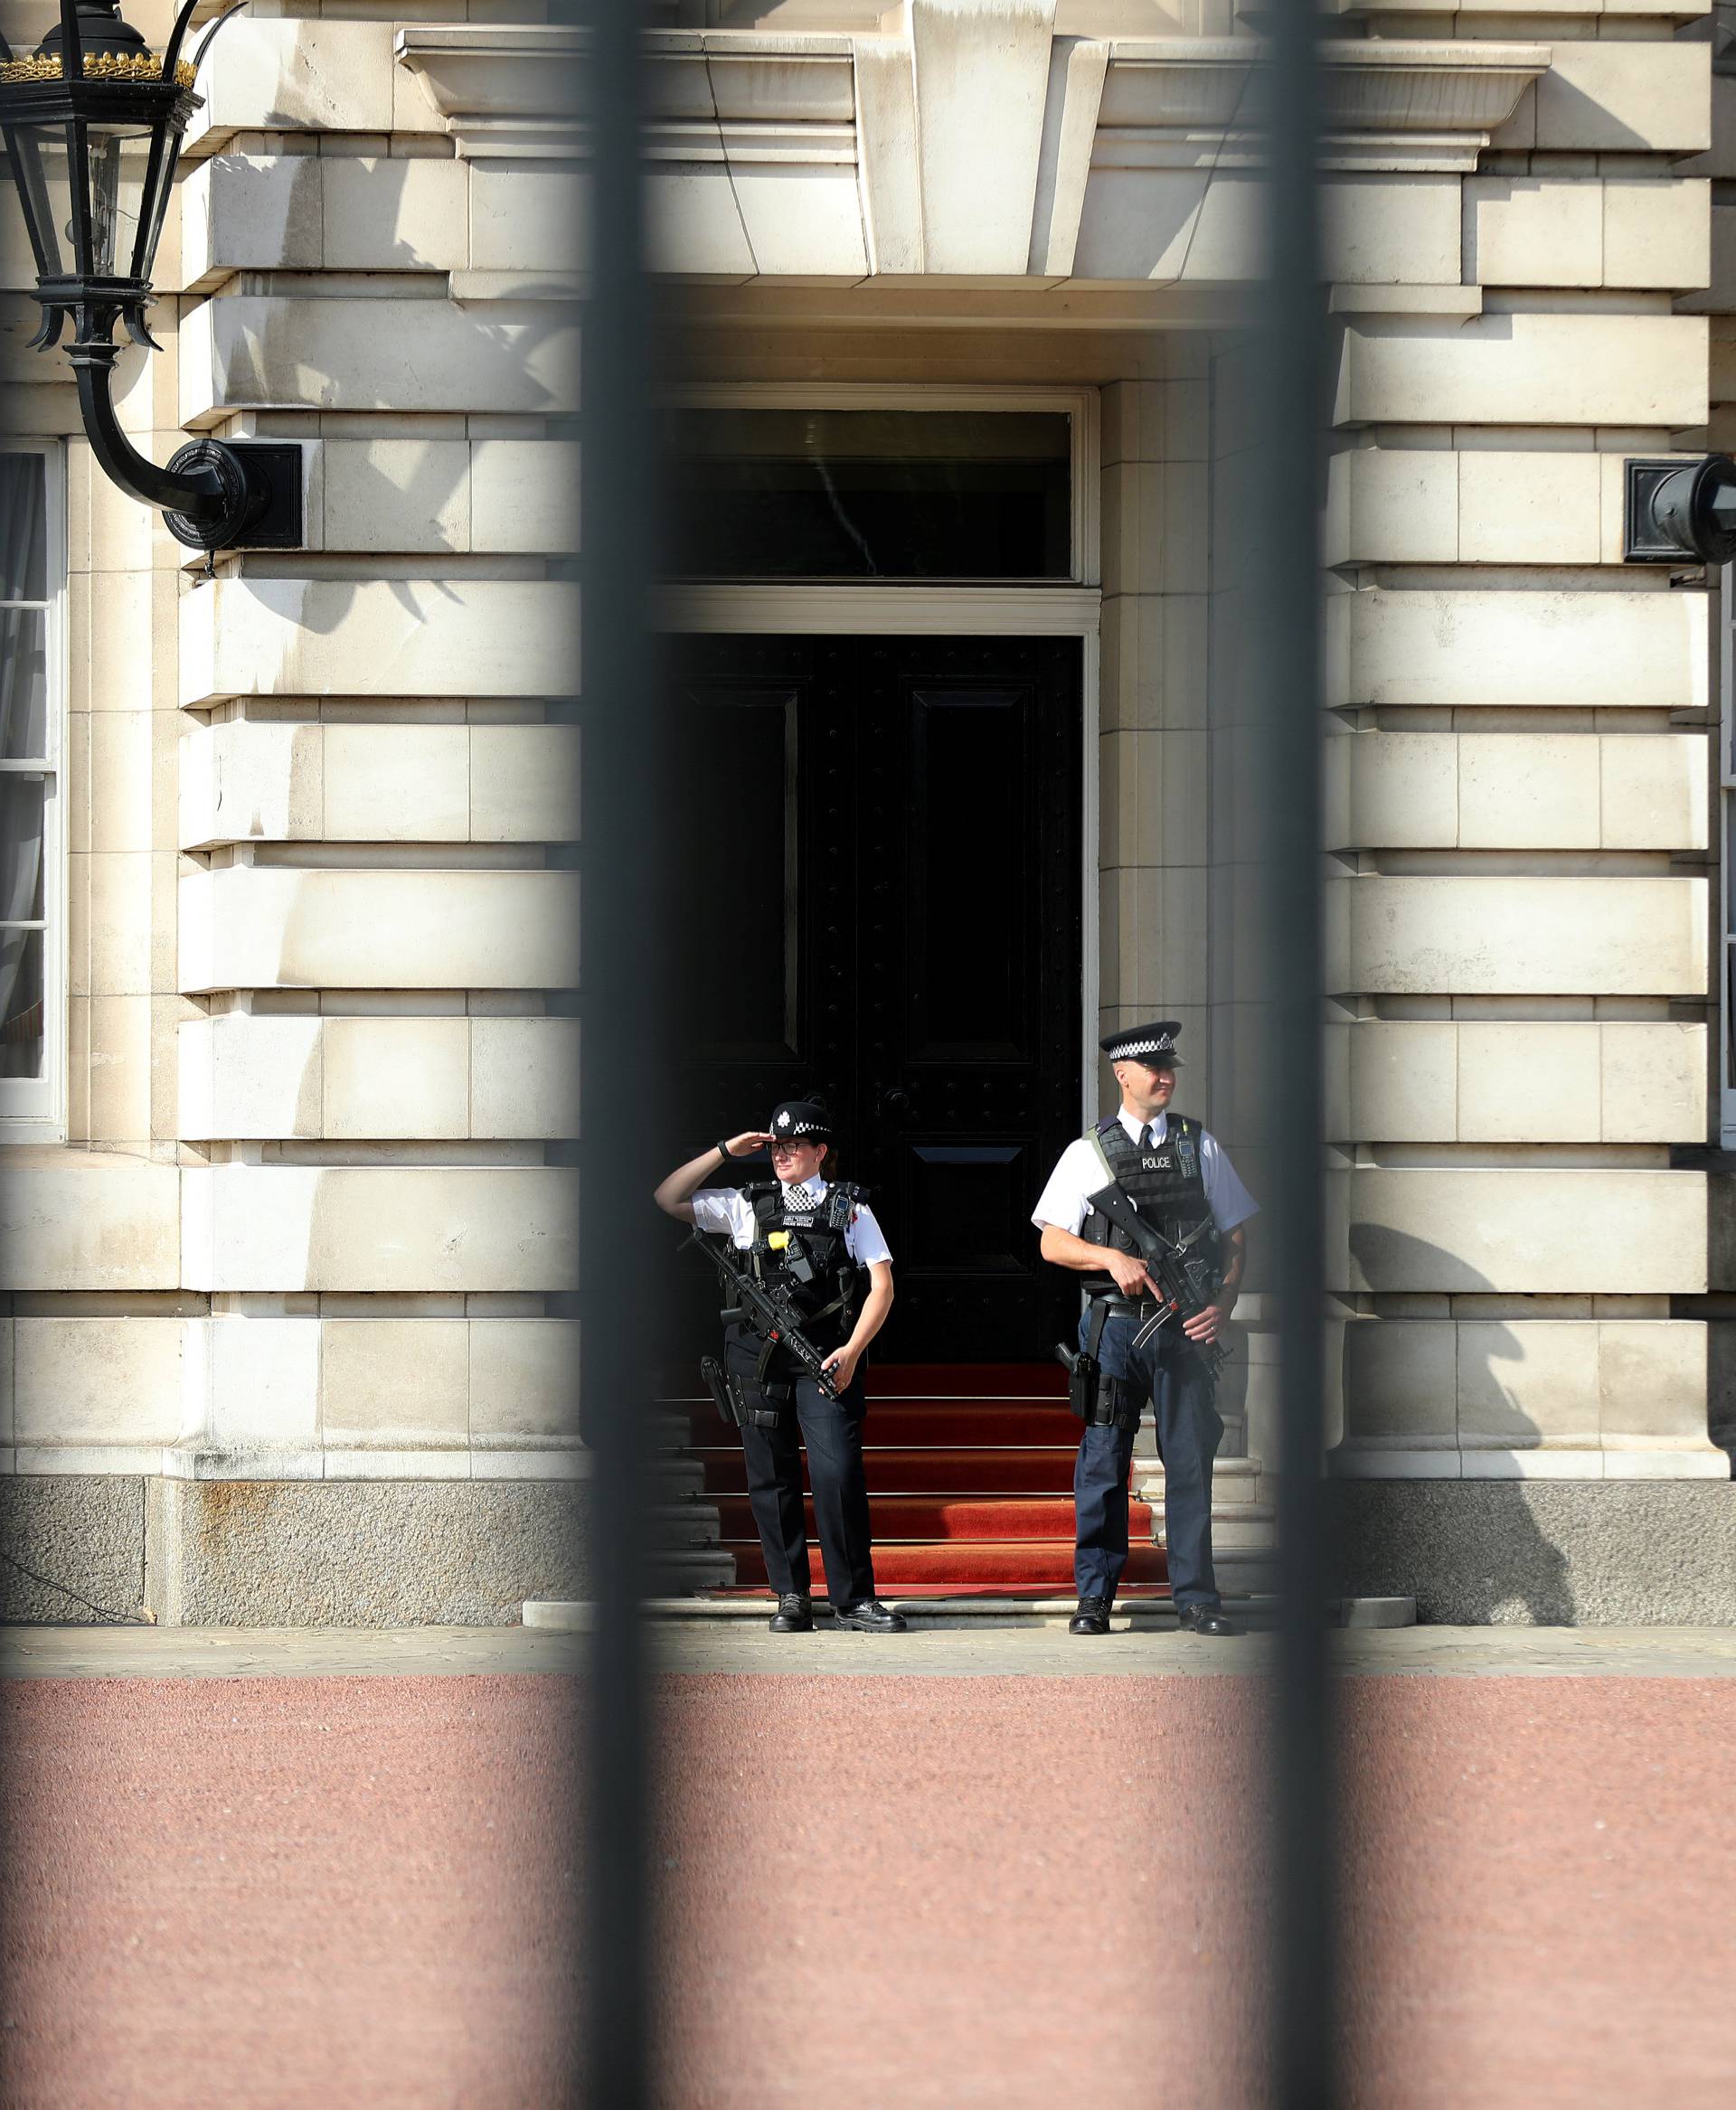 Police officers are seen on duty within the grounds of Buckingham Palace in London